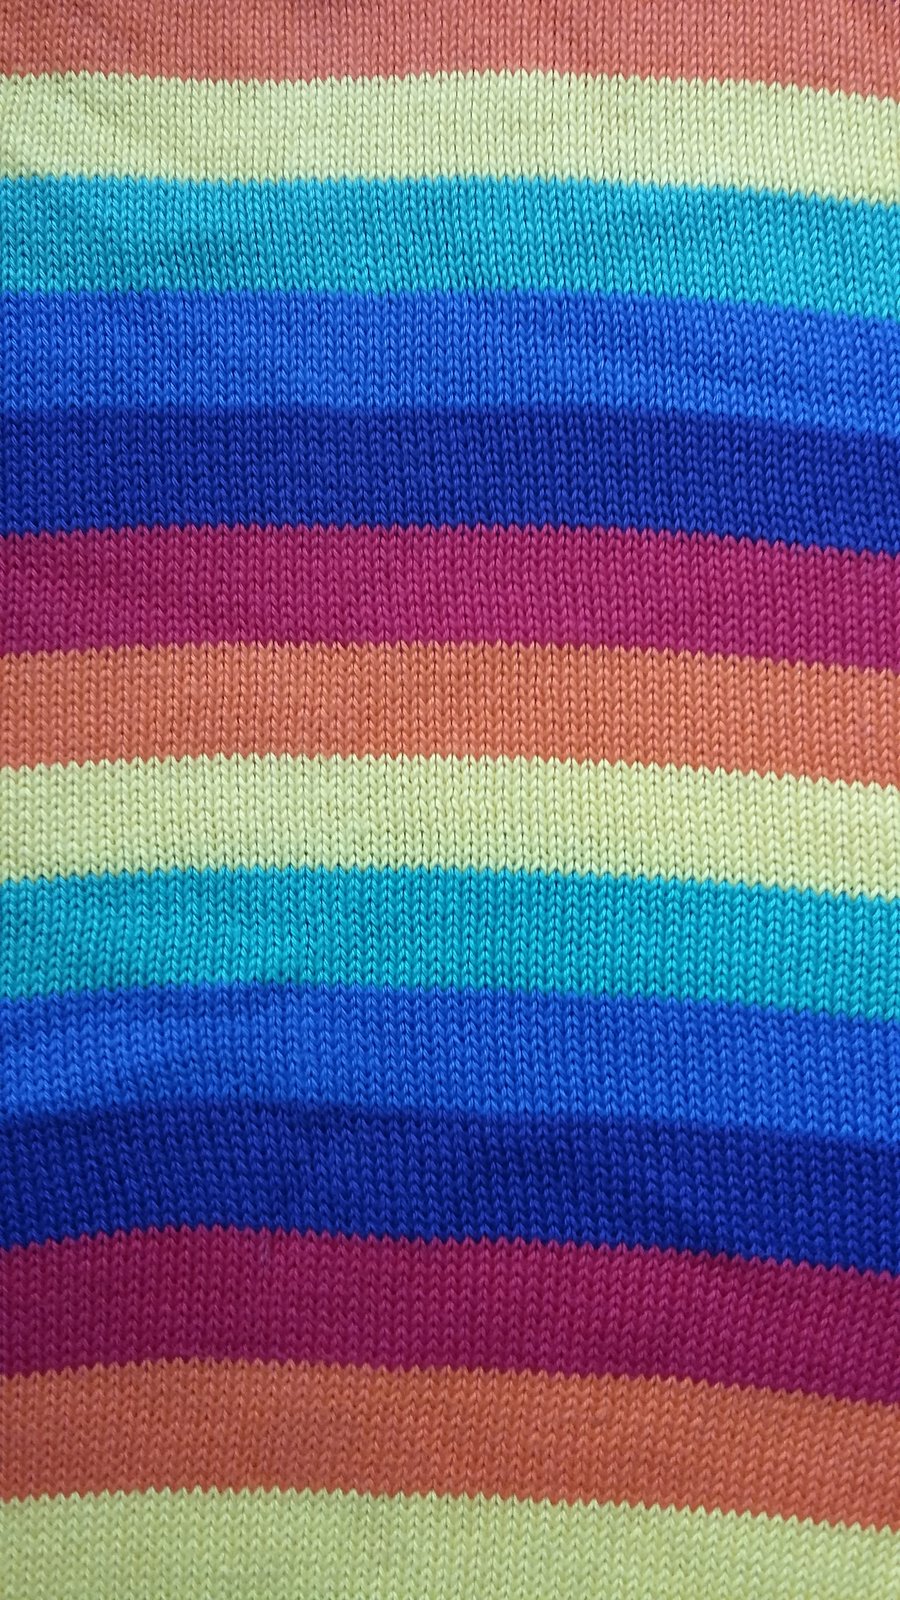 Baby blanket in rainbow striped cotton. Plain back, reversible.